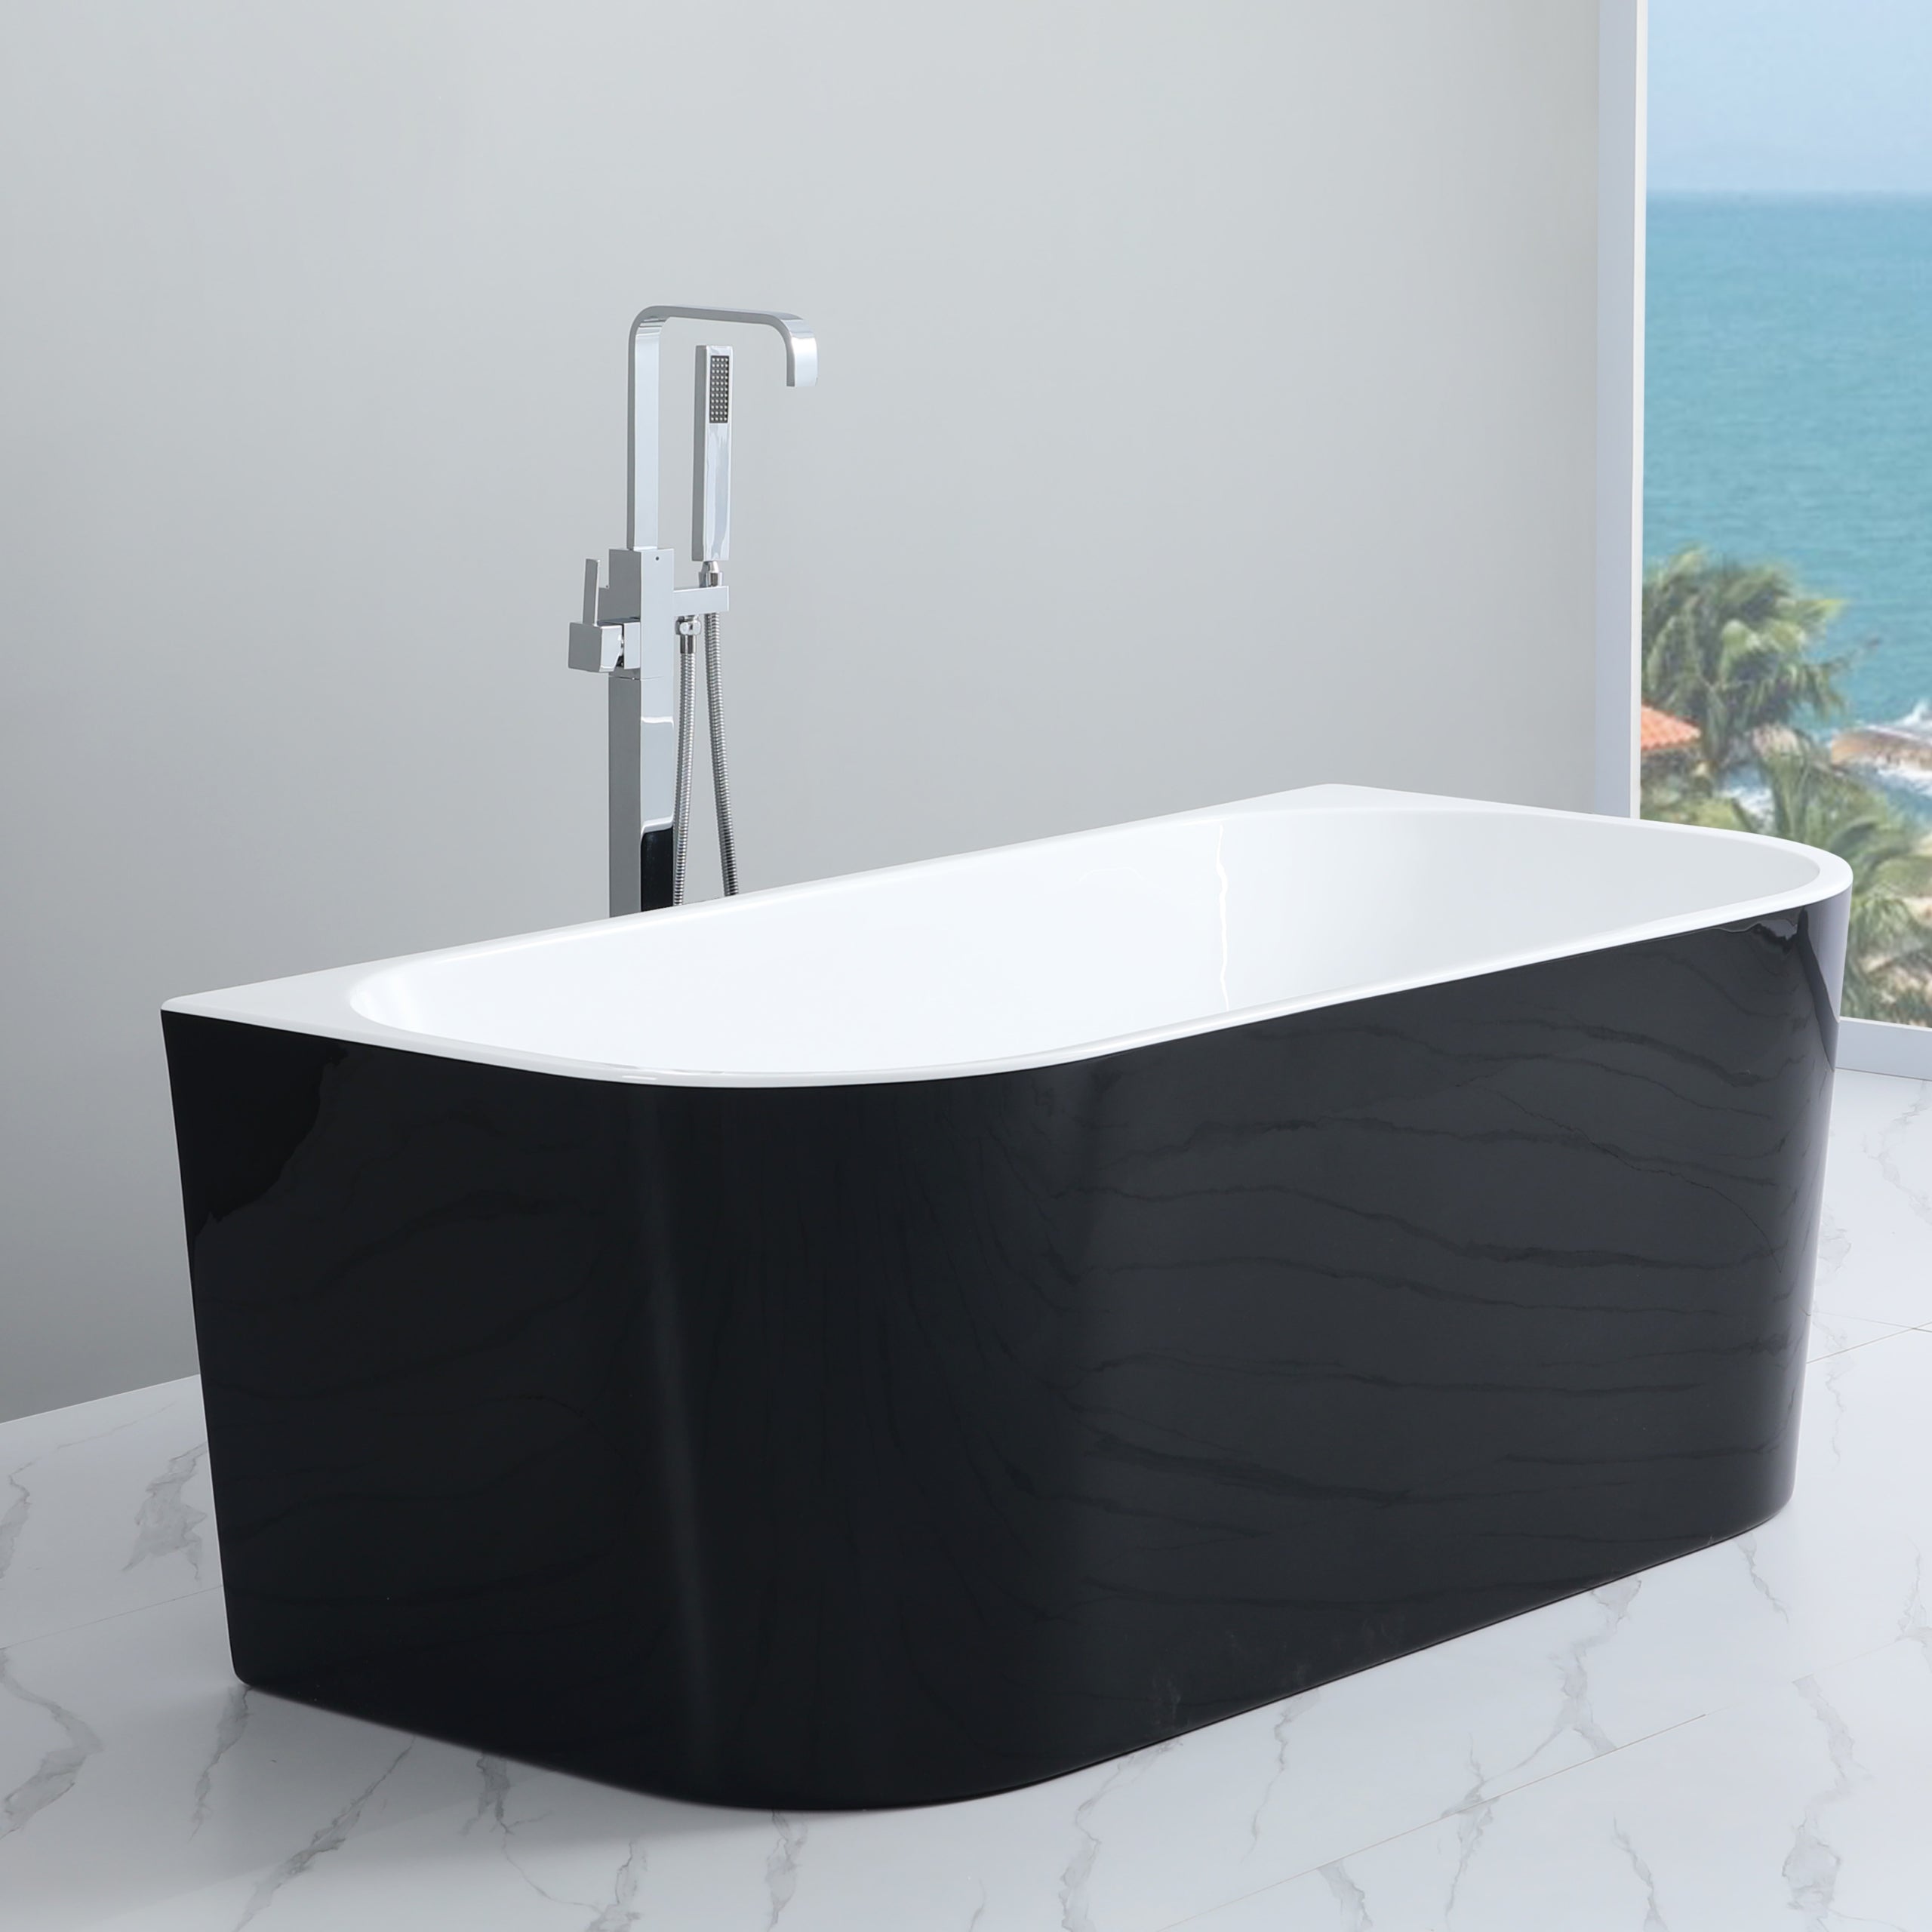 POSEIDON ELIVIA BACK TO WALL BATHTUB MATTE BLACK AND MATTE WHITE (AVAILABLE IN 1400MM, 1500MM AND 1700MM)